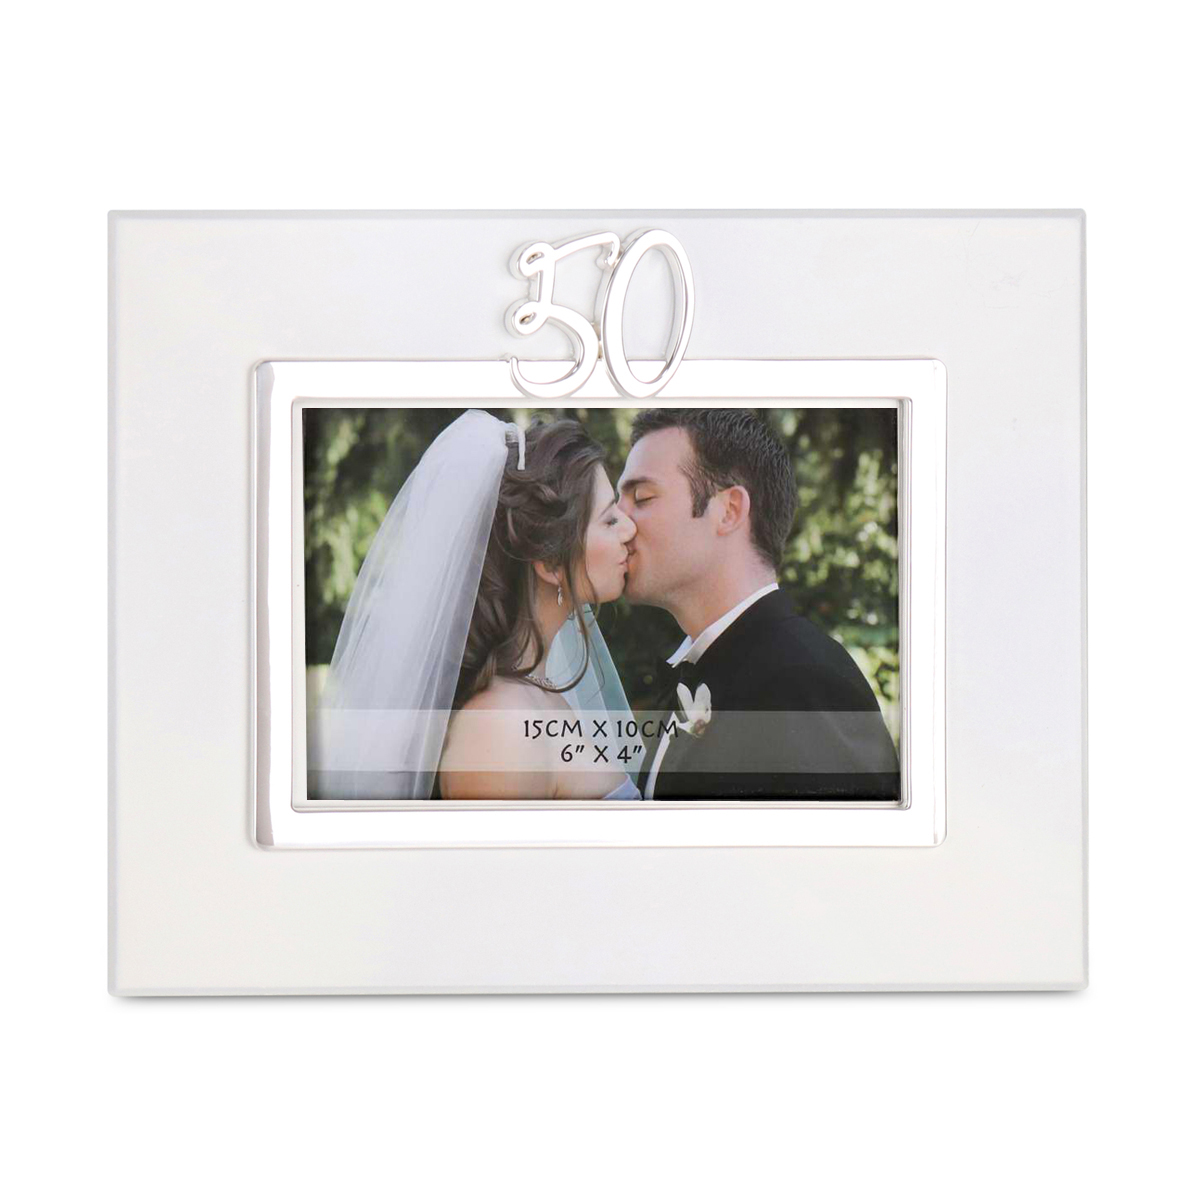 The number 50 wooden frame picture frame